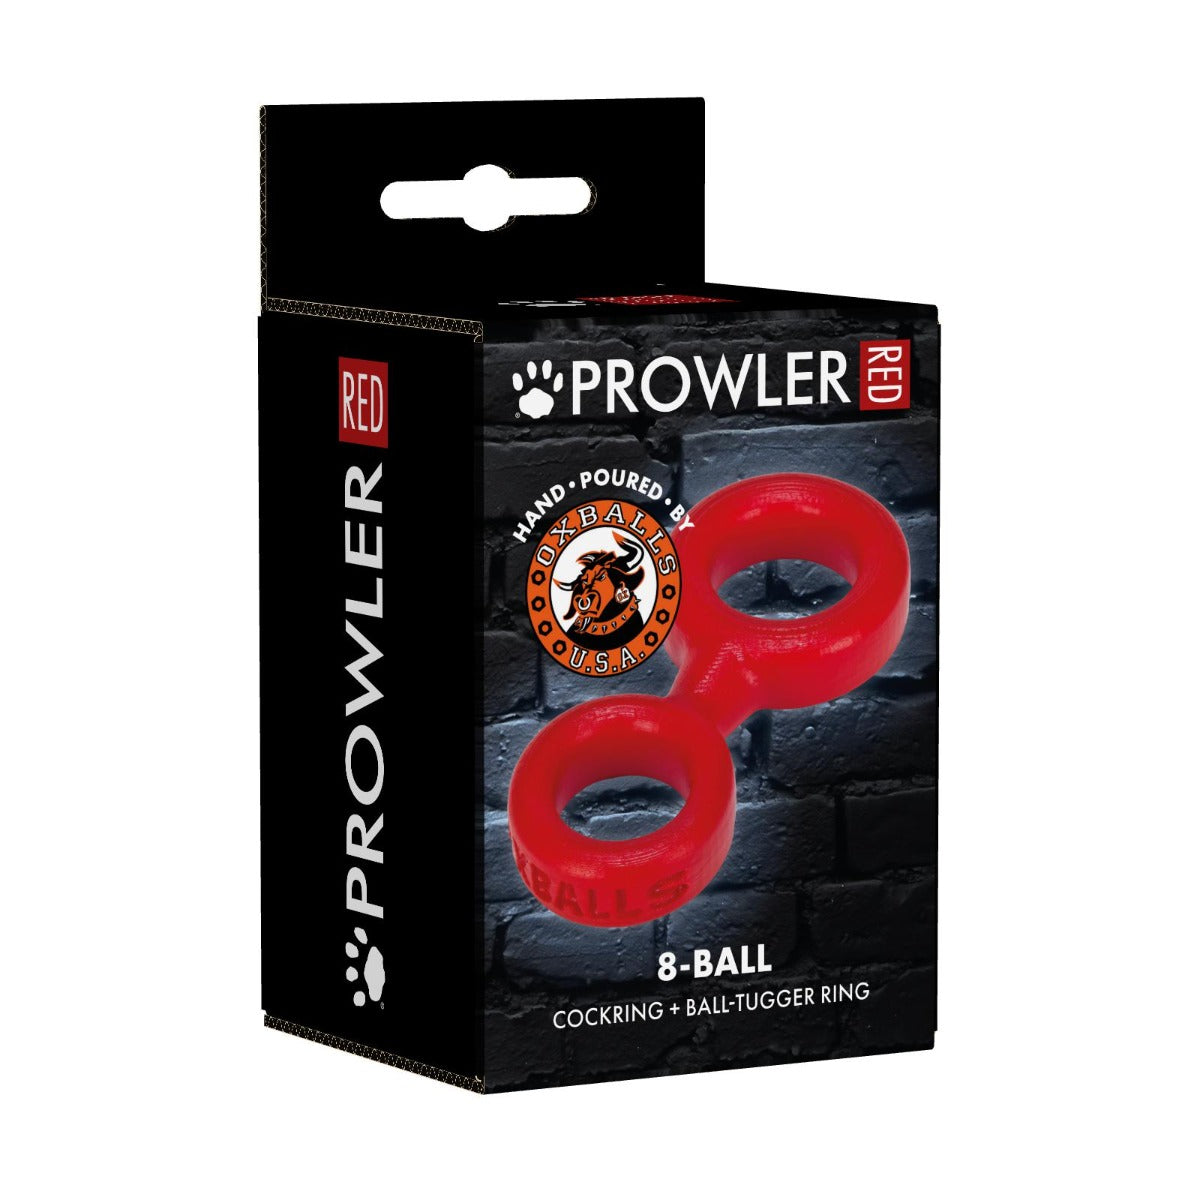 Prowler RED 8-Ball by Oxballs (7020752666788)